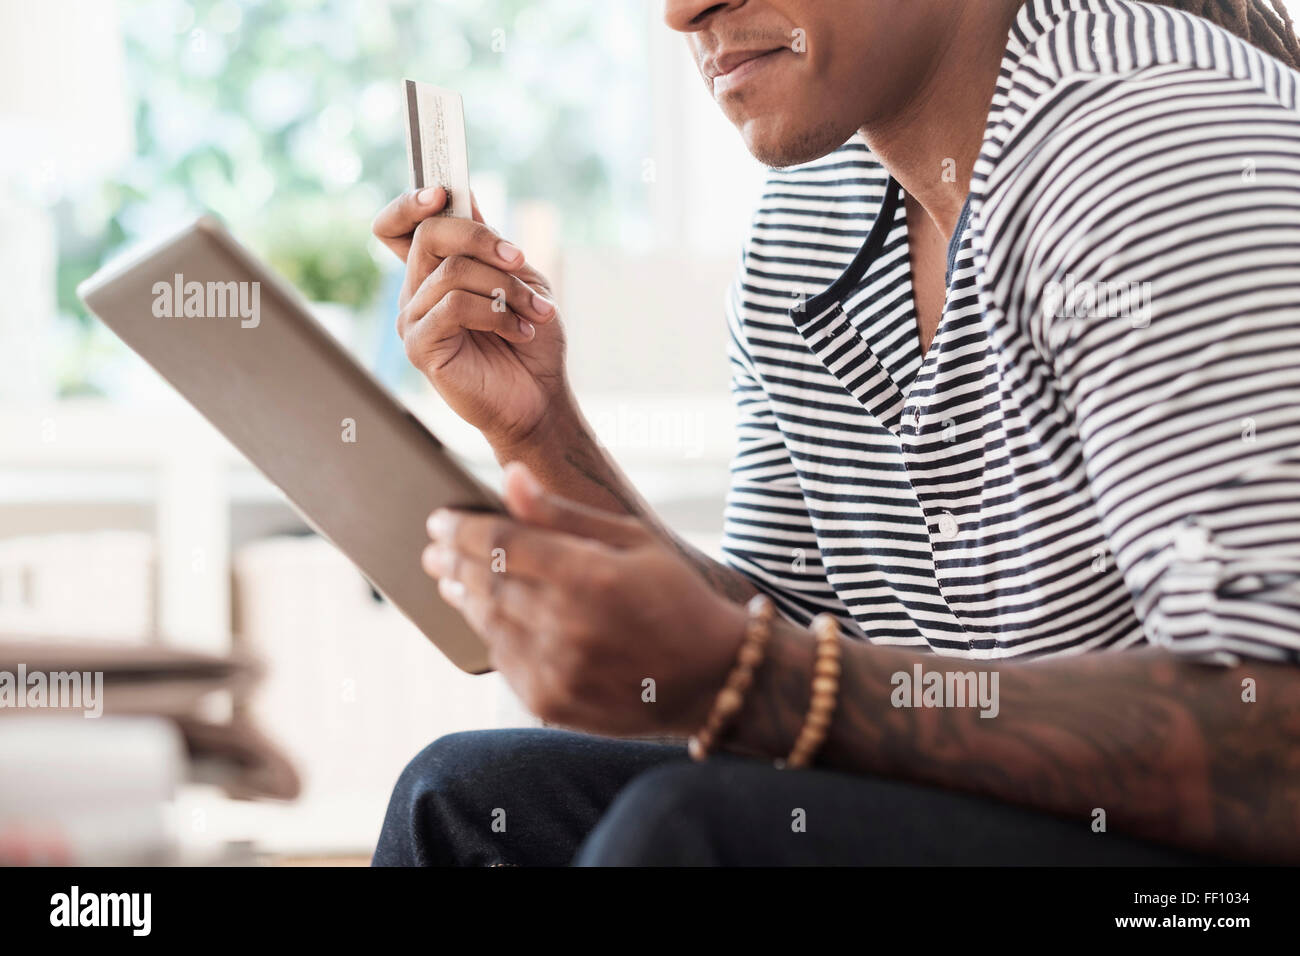 Mixed race man shopping online with digital tablet Stock Photo